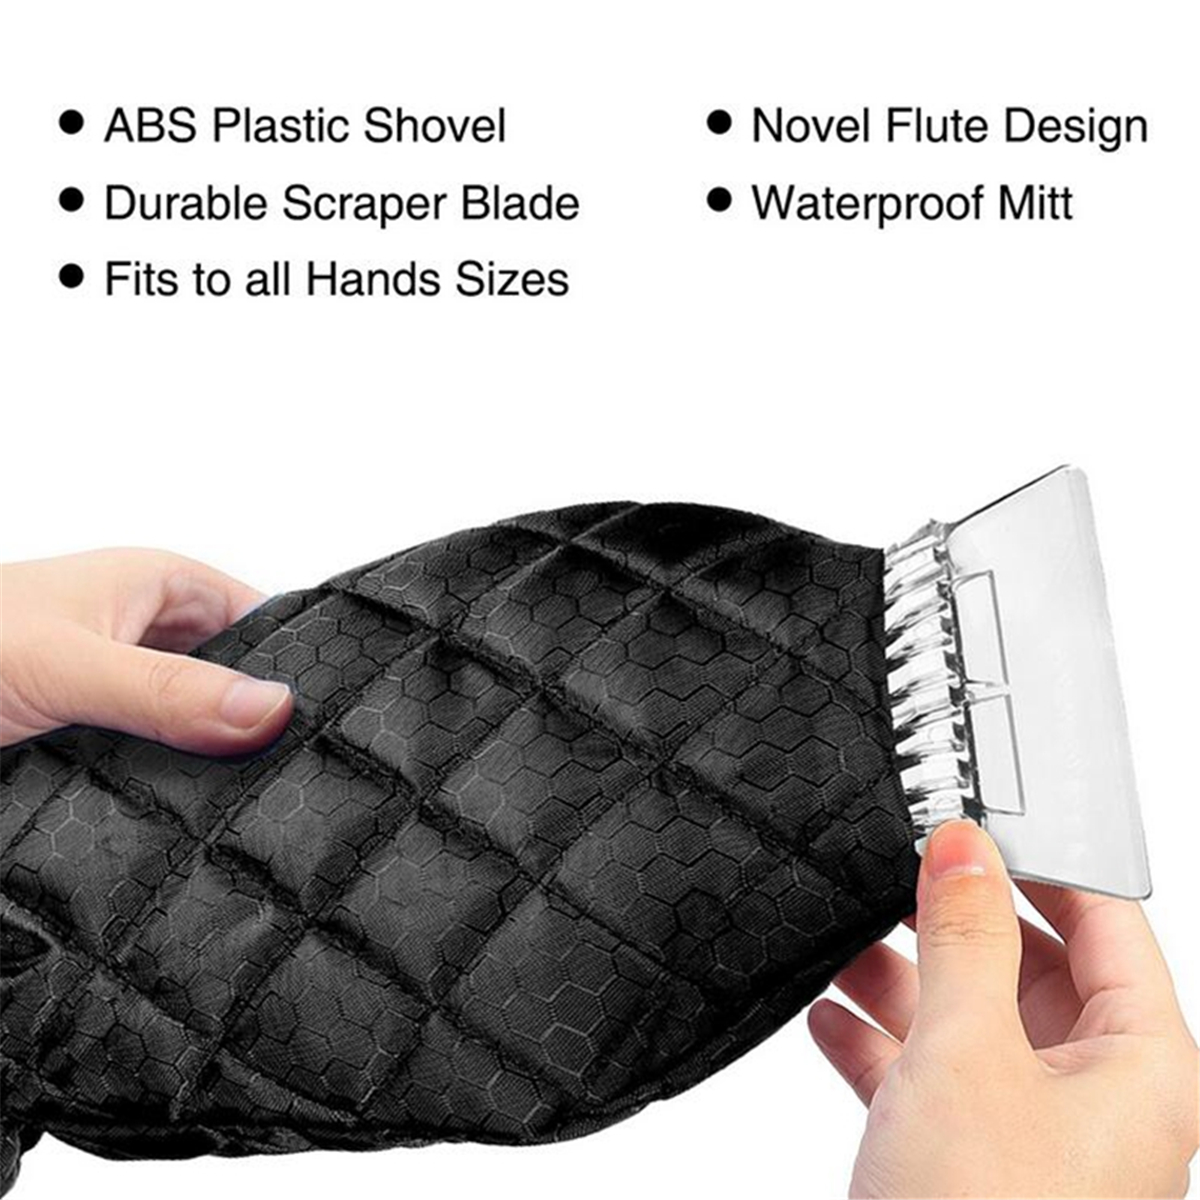 Car-stying-Snow-Scraper-Removal-Glove-420D-Jacquard-Oxford-Cloth-Cleaning-Snow-Shovel-Ice-Scraper-To-1396582